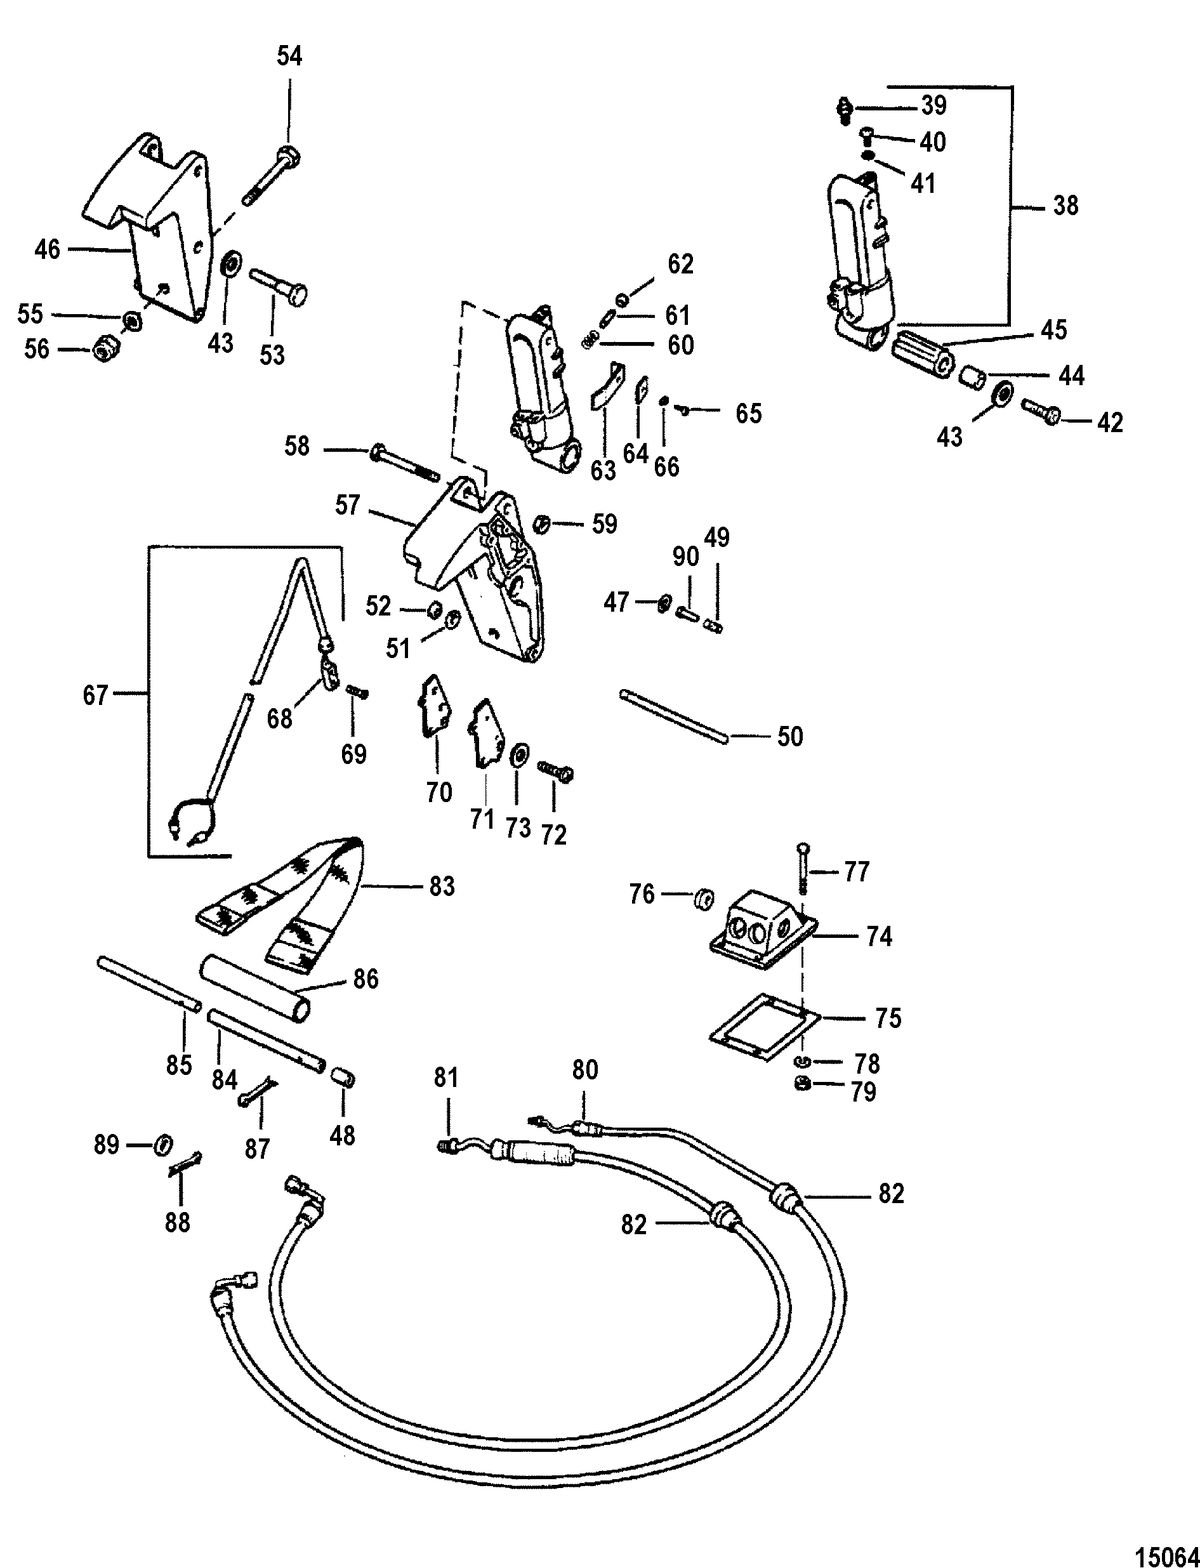 ACCESSORIES TRIM / TILT / LIFT SYSTEMS AND COMPONENTS Power Trim Kit(76509A25 And 76509A26) (Page 2 Of 2)